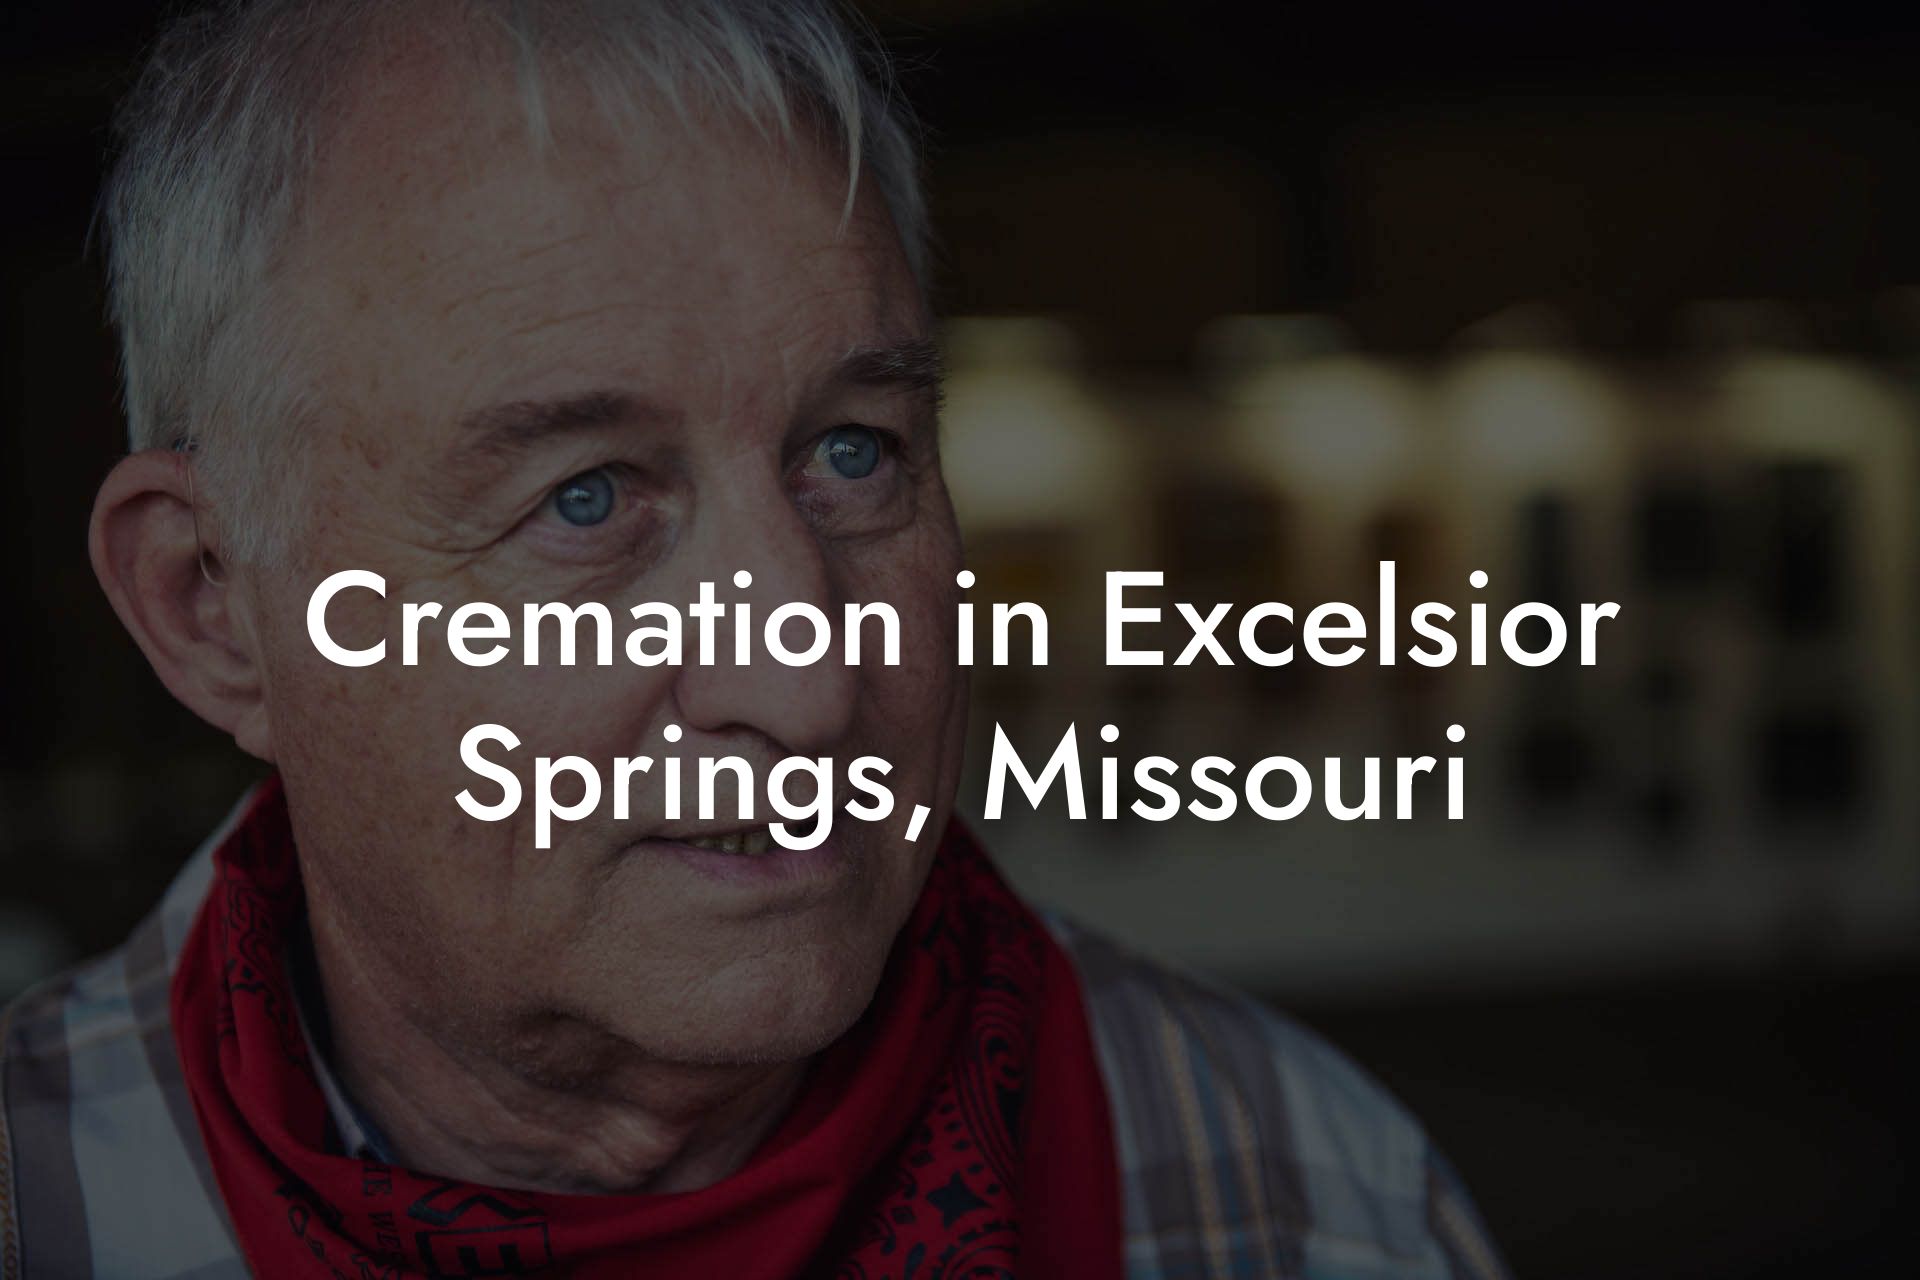 Cremation in Excelsior Springs, Missouri